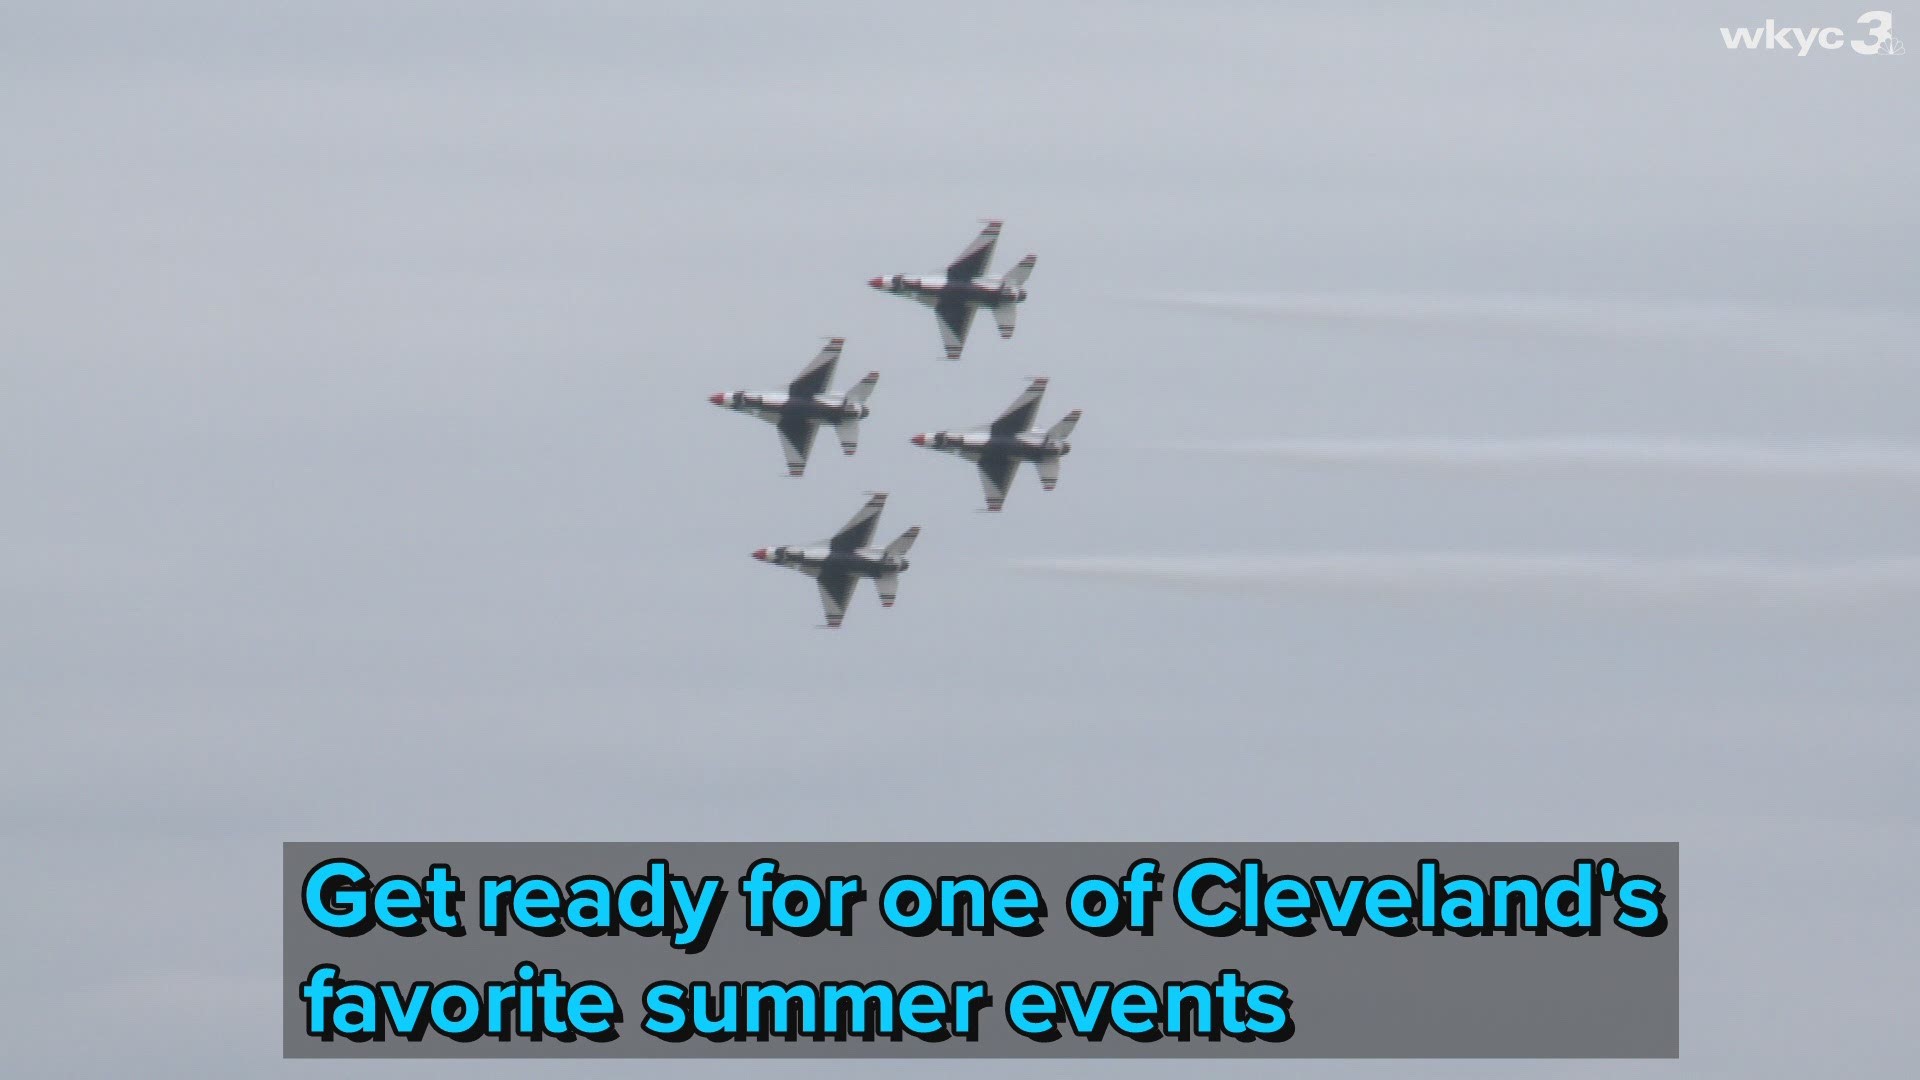 Get ready for one of Cleveland's favorite summer events.